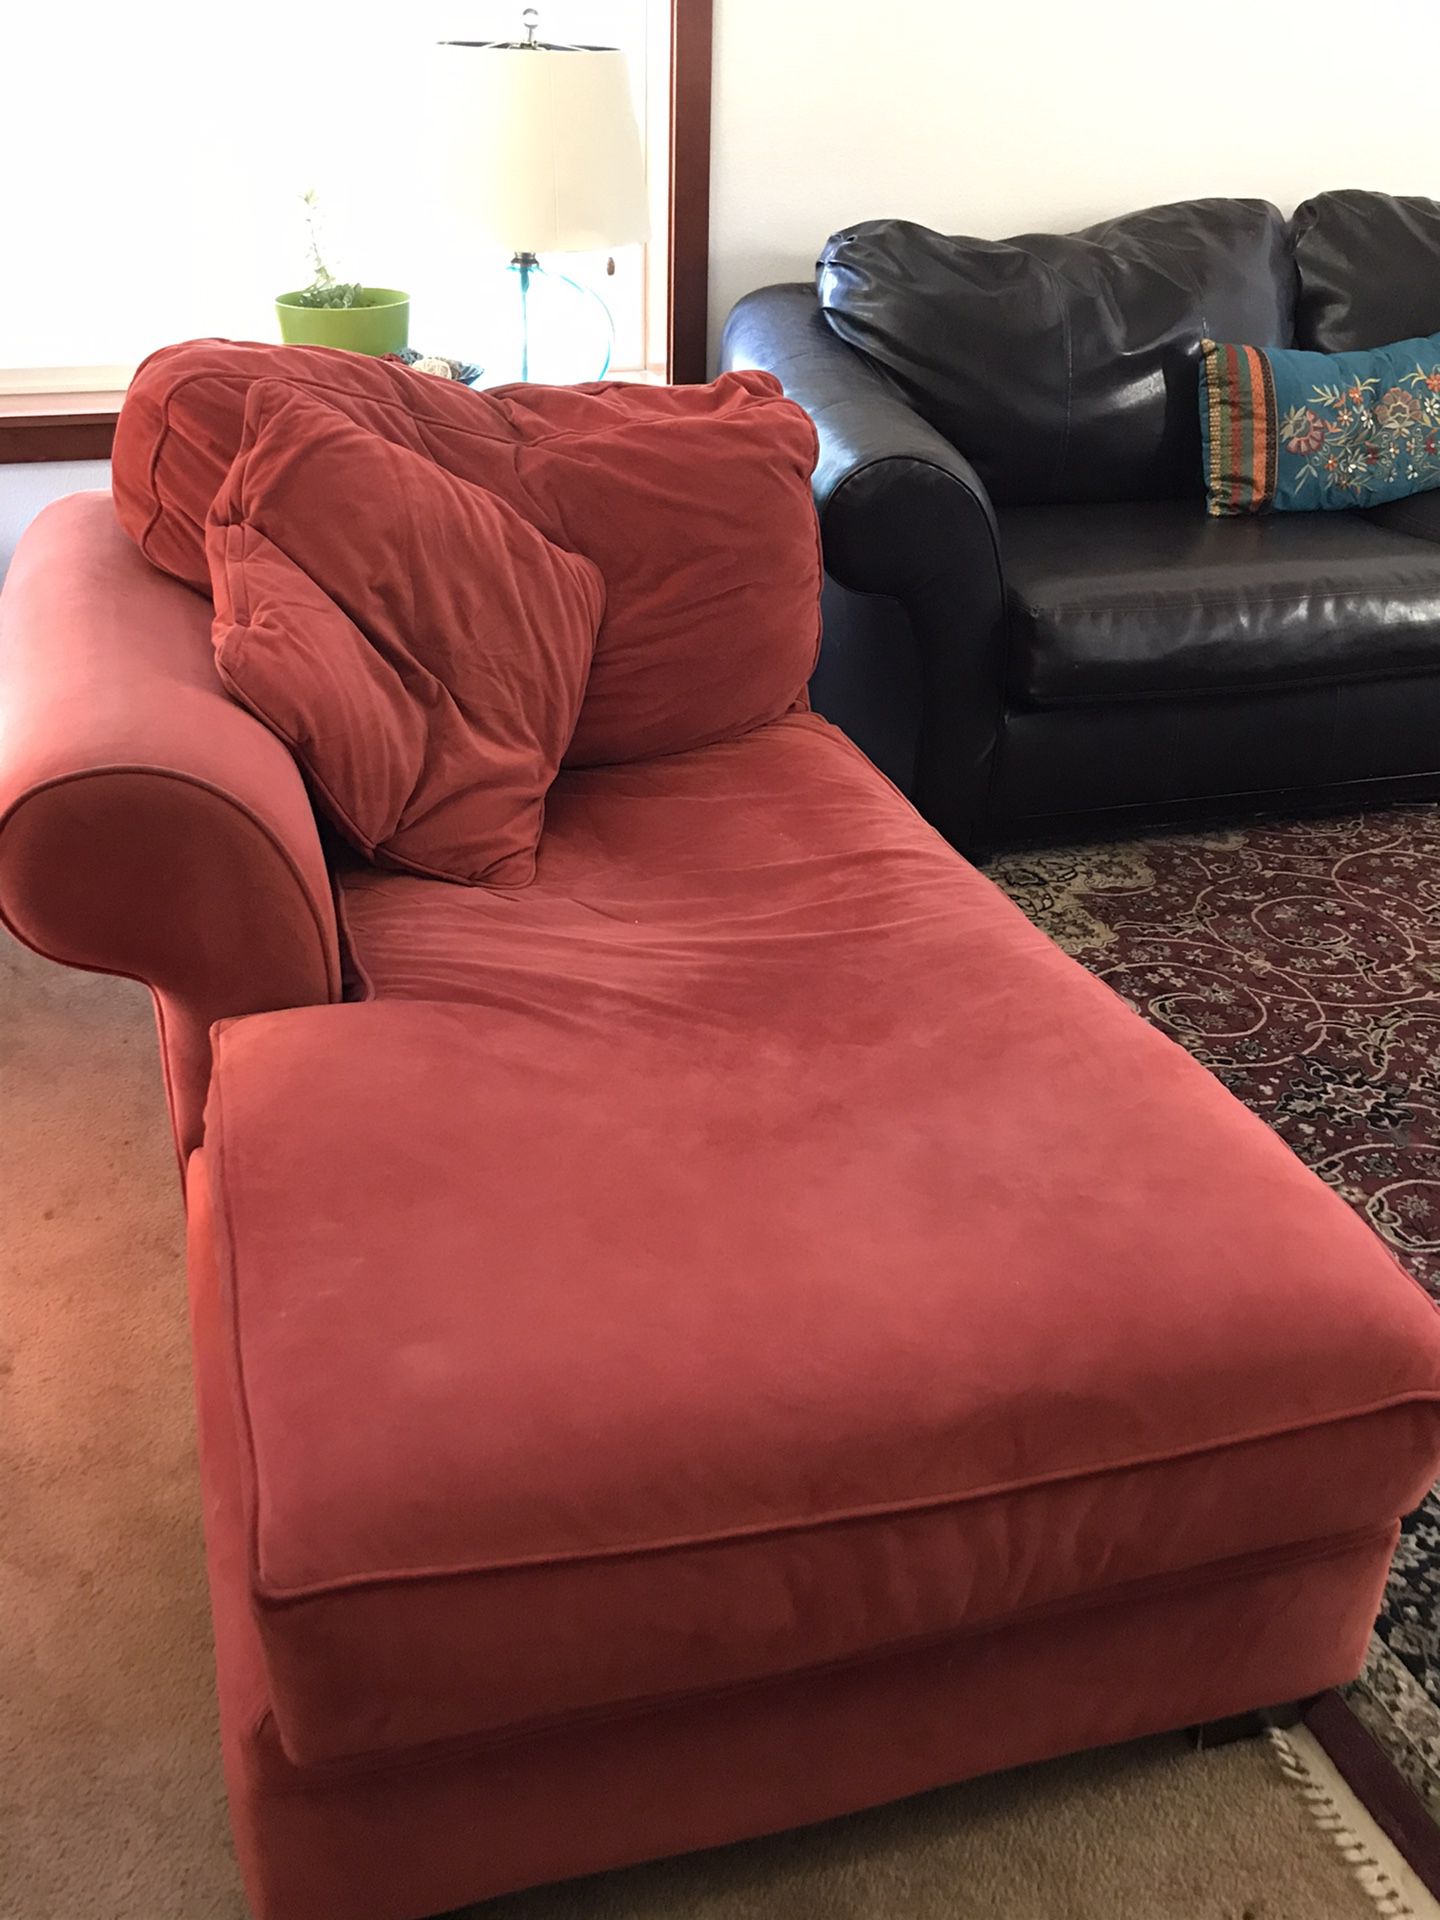 Free 3 Piece Sectional Couch in Duvall Wa